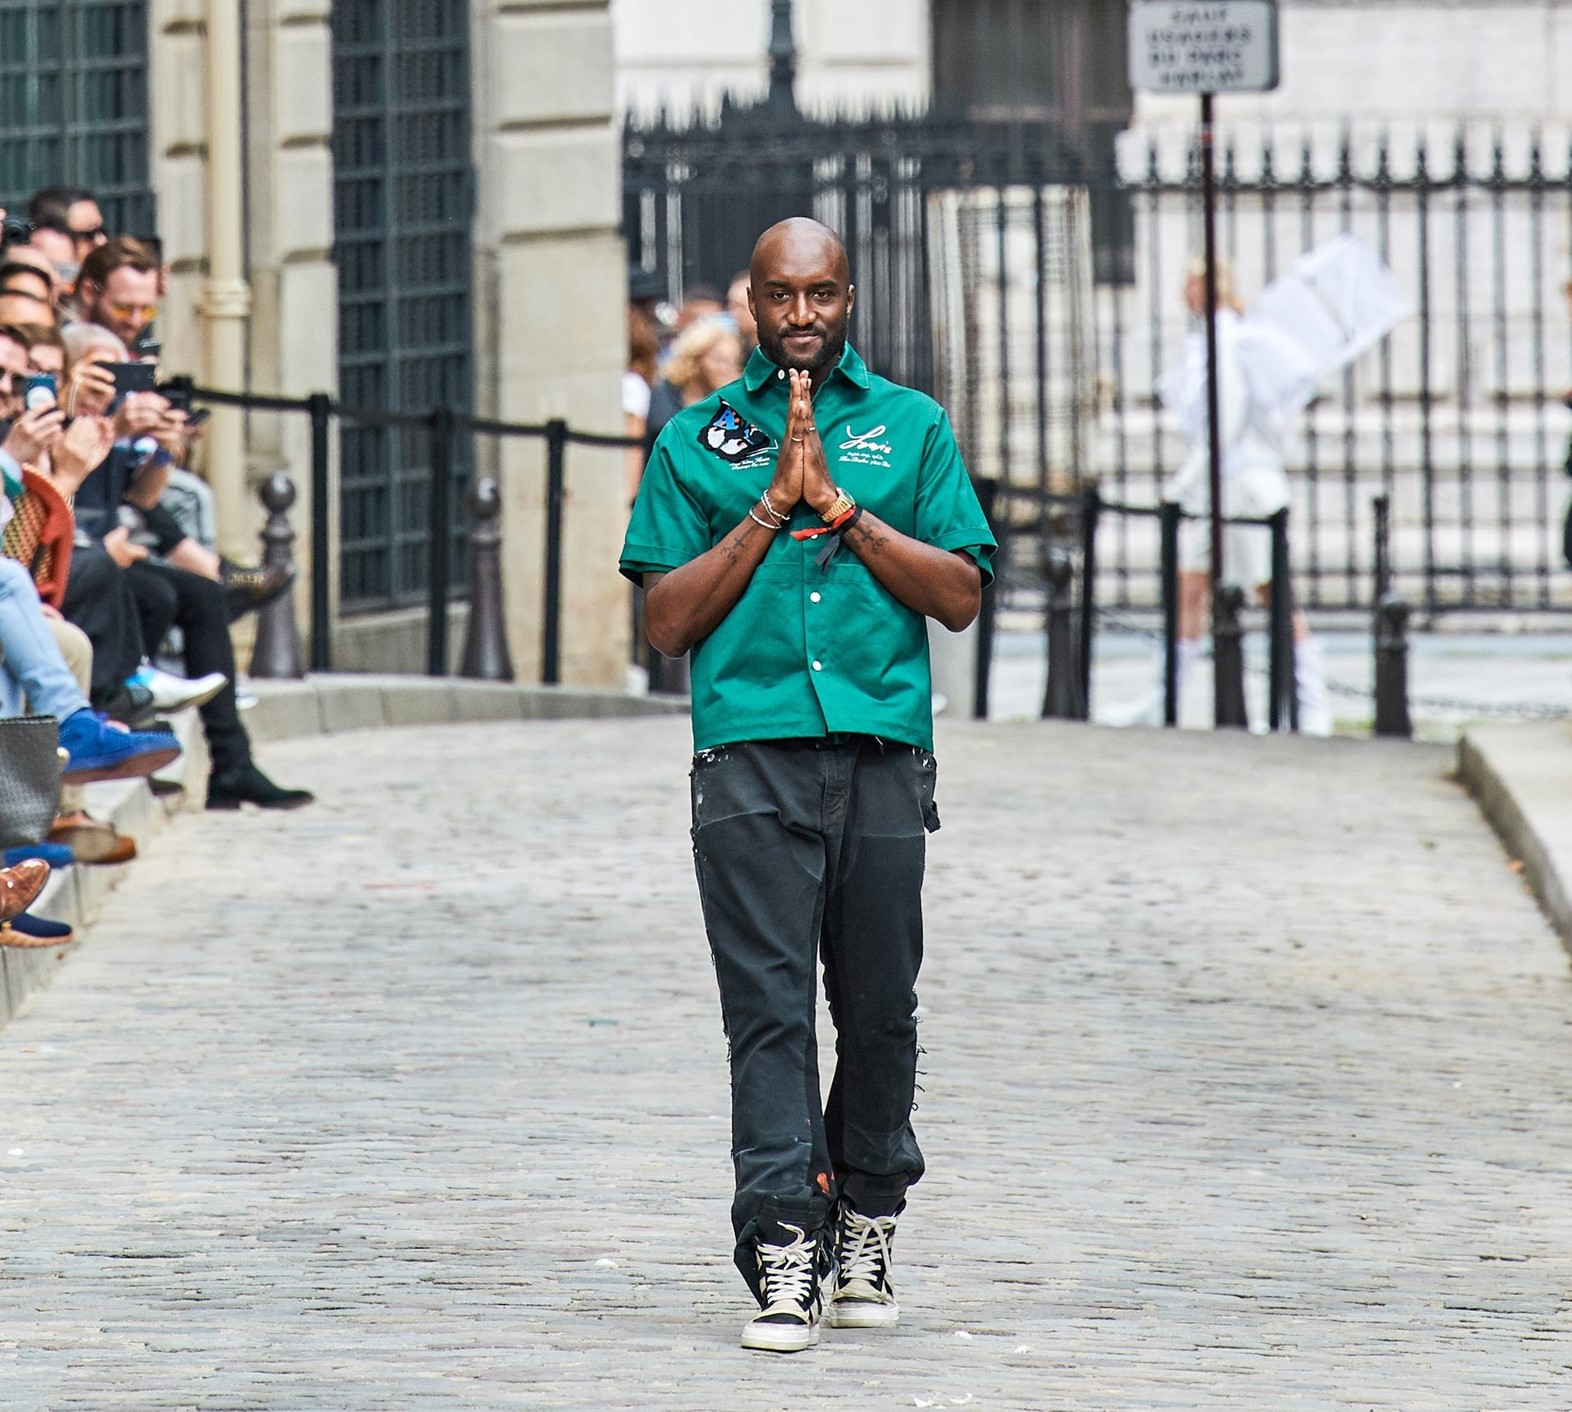 There was a massive rendition of Virgil Abloh throwing a paper plane -, Virgil  Abloh